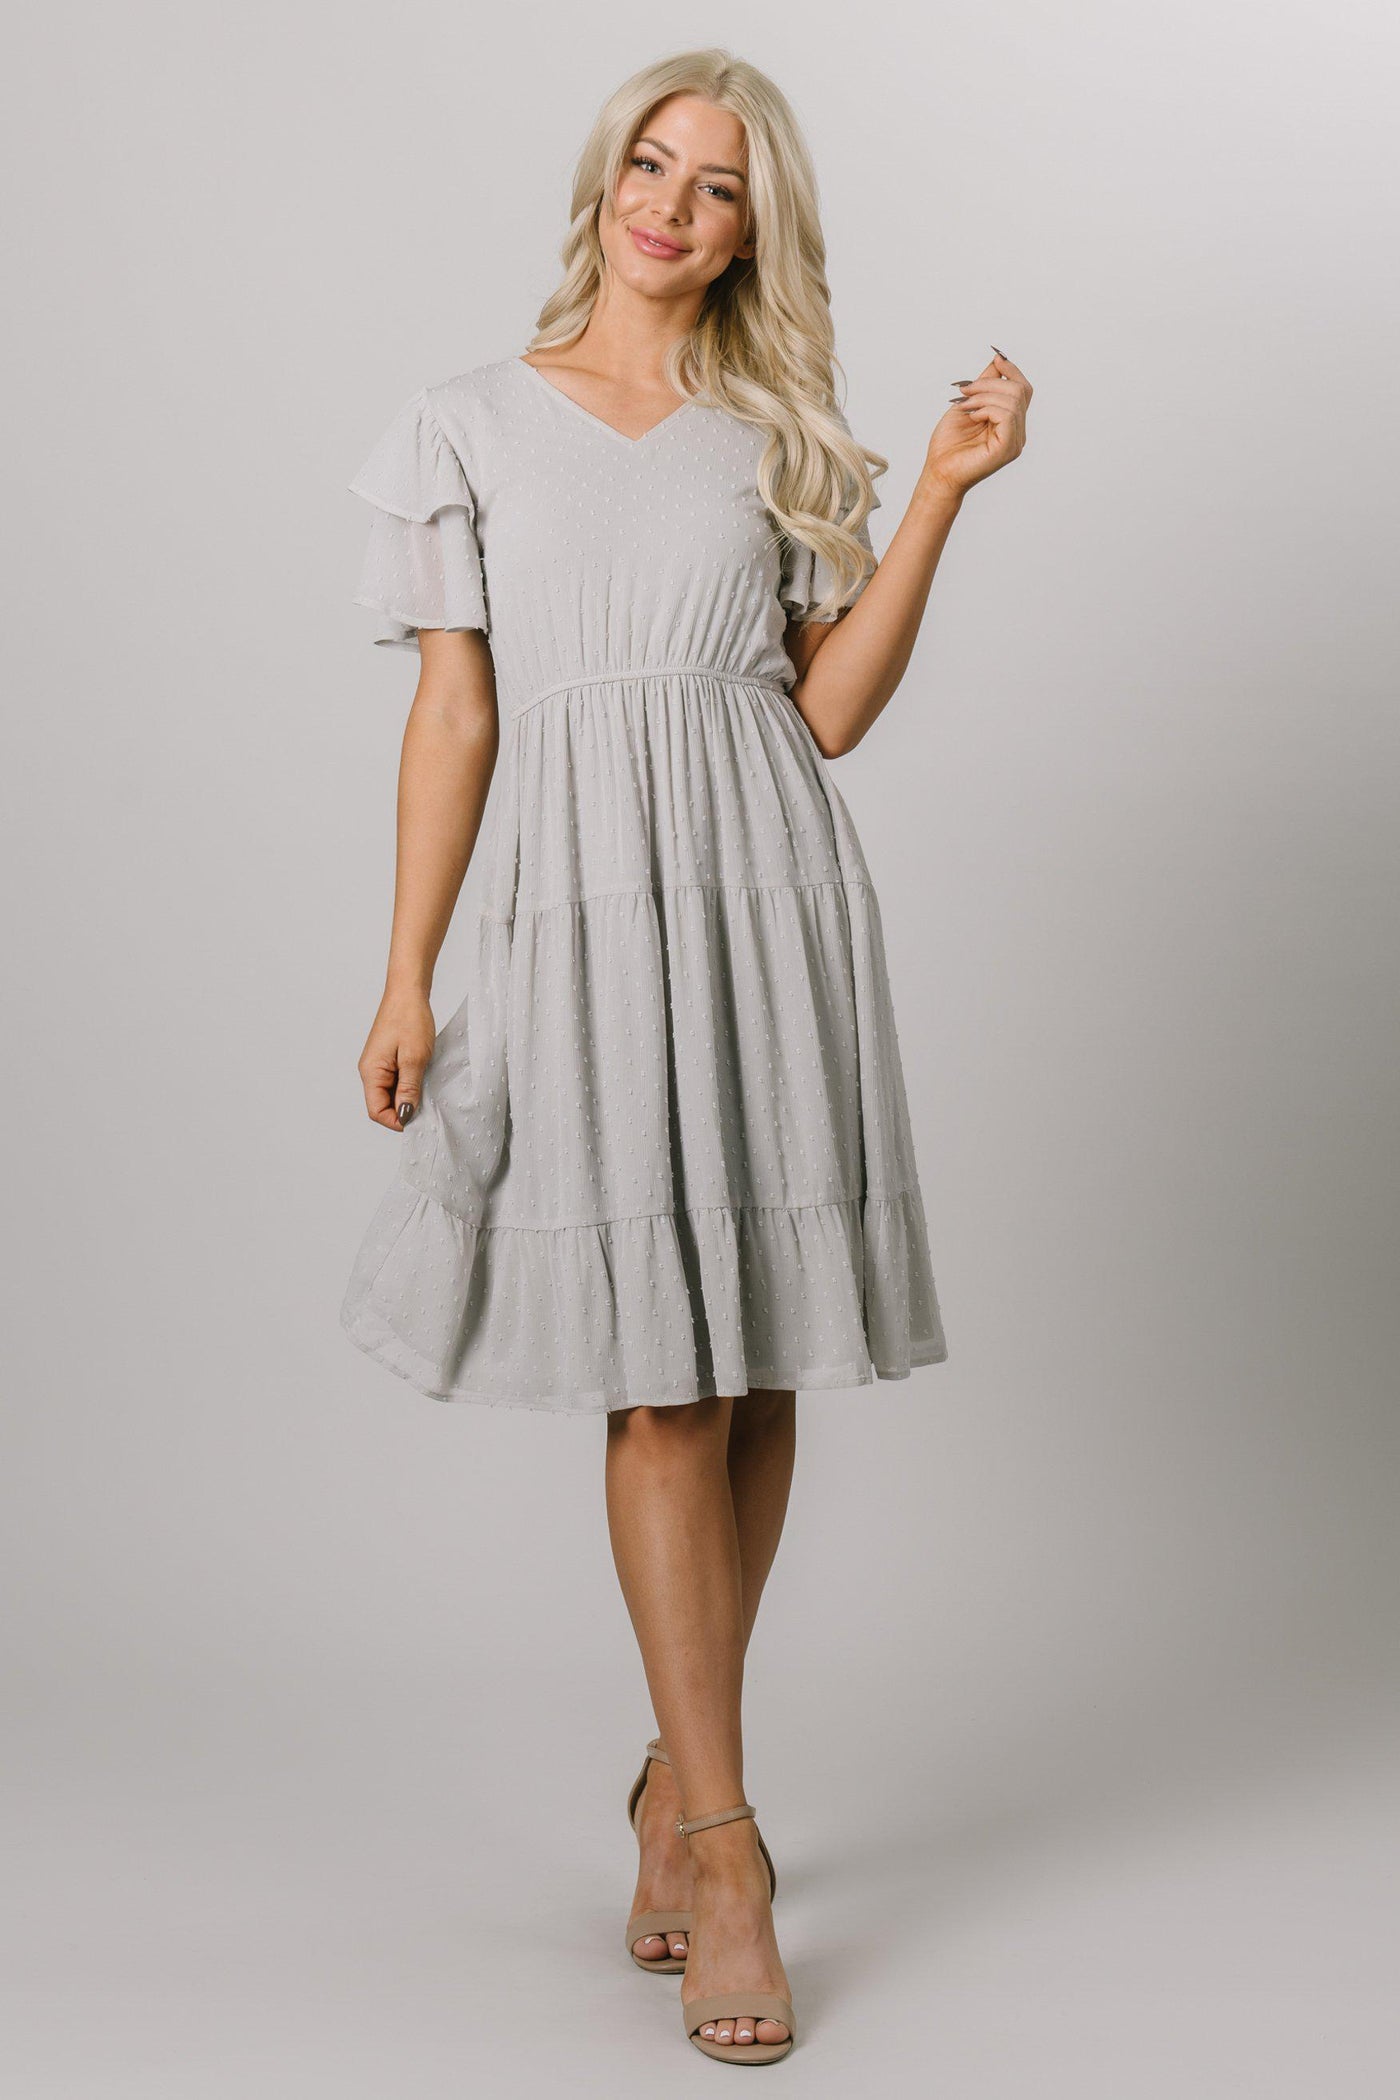 Modest Dresses - Modest Clothing - Everyday Modest Dresses - Bridesmaid Modest Dresses. Modest knee length dress tha has swiss dots all around and flutter sleeves. It comes in faded blue with a v-neckline.